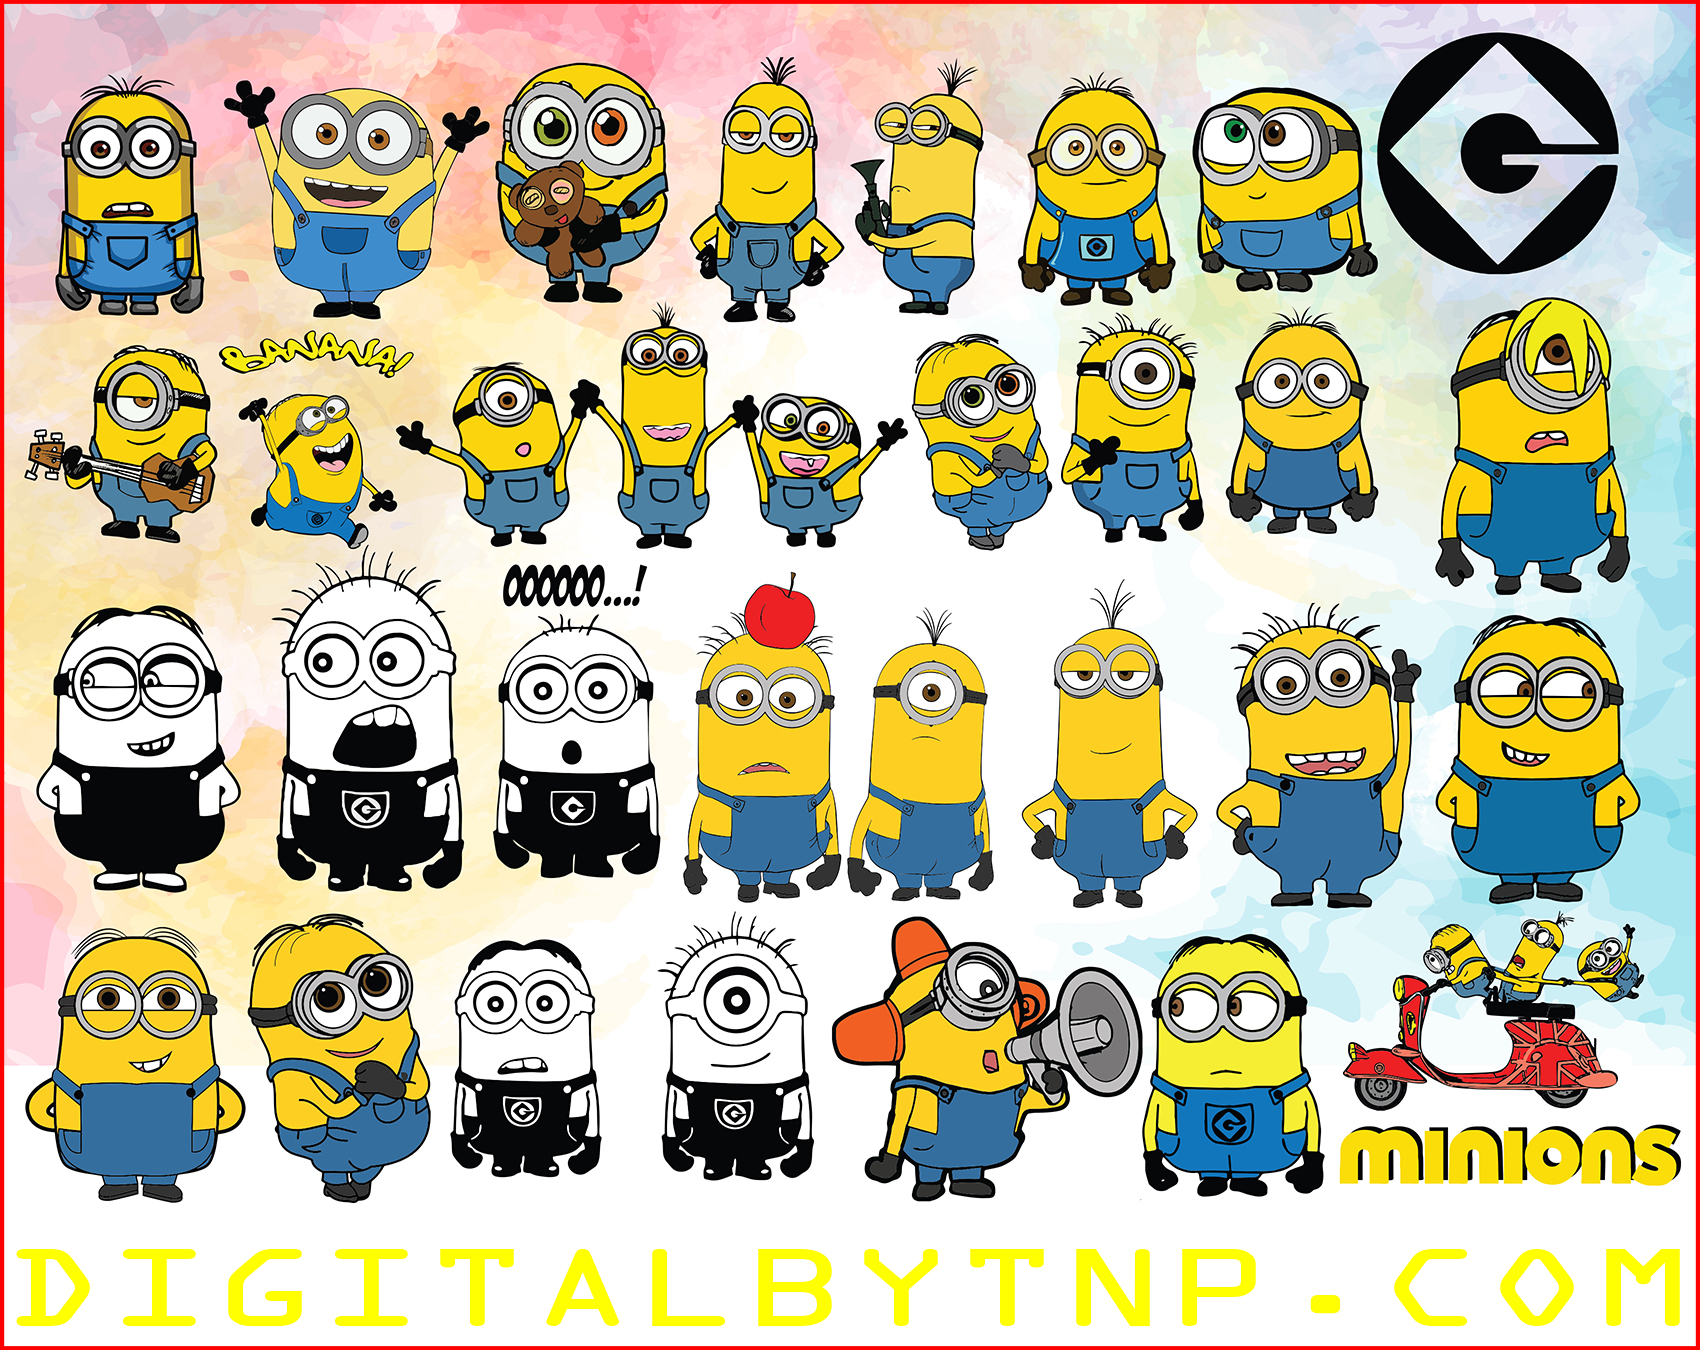 A Sale Minions Svg Disney Svg Disney Bundle Svg Minions Cut File Minions Clip Art Minions Vector Minions Layered Despicable Me Svg Files For Silhouette Cameo Cricut Customer Satisfaction Is Our